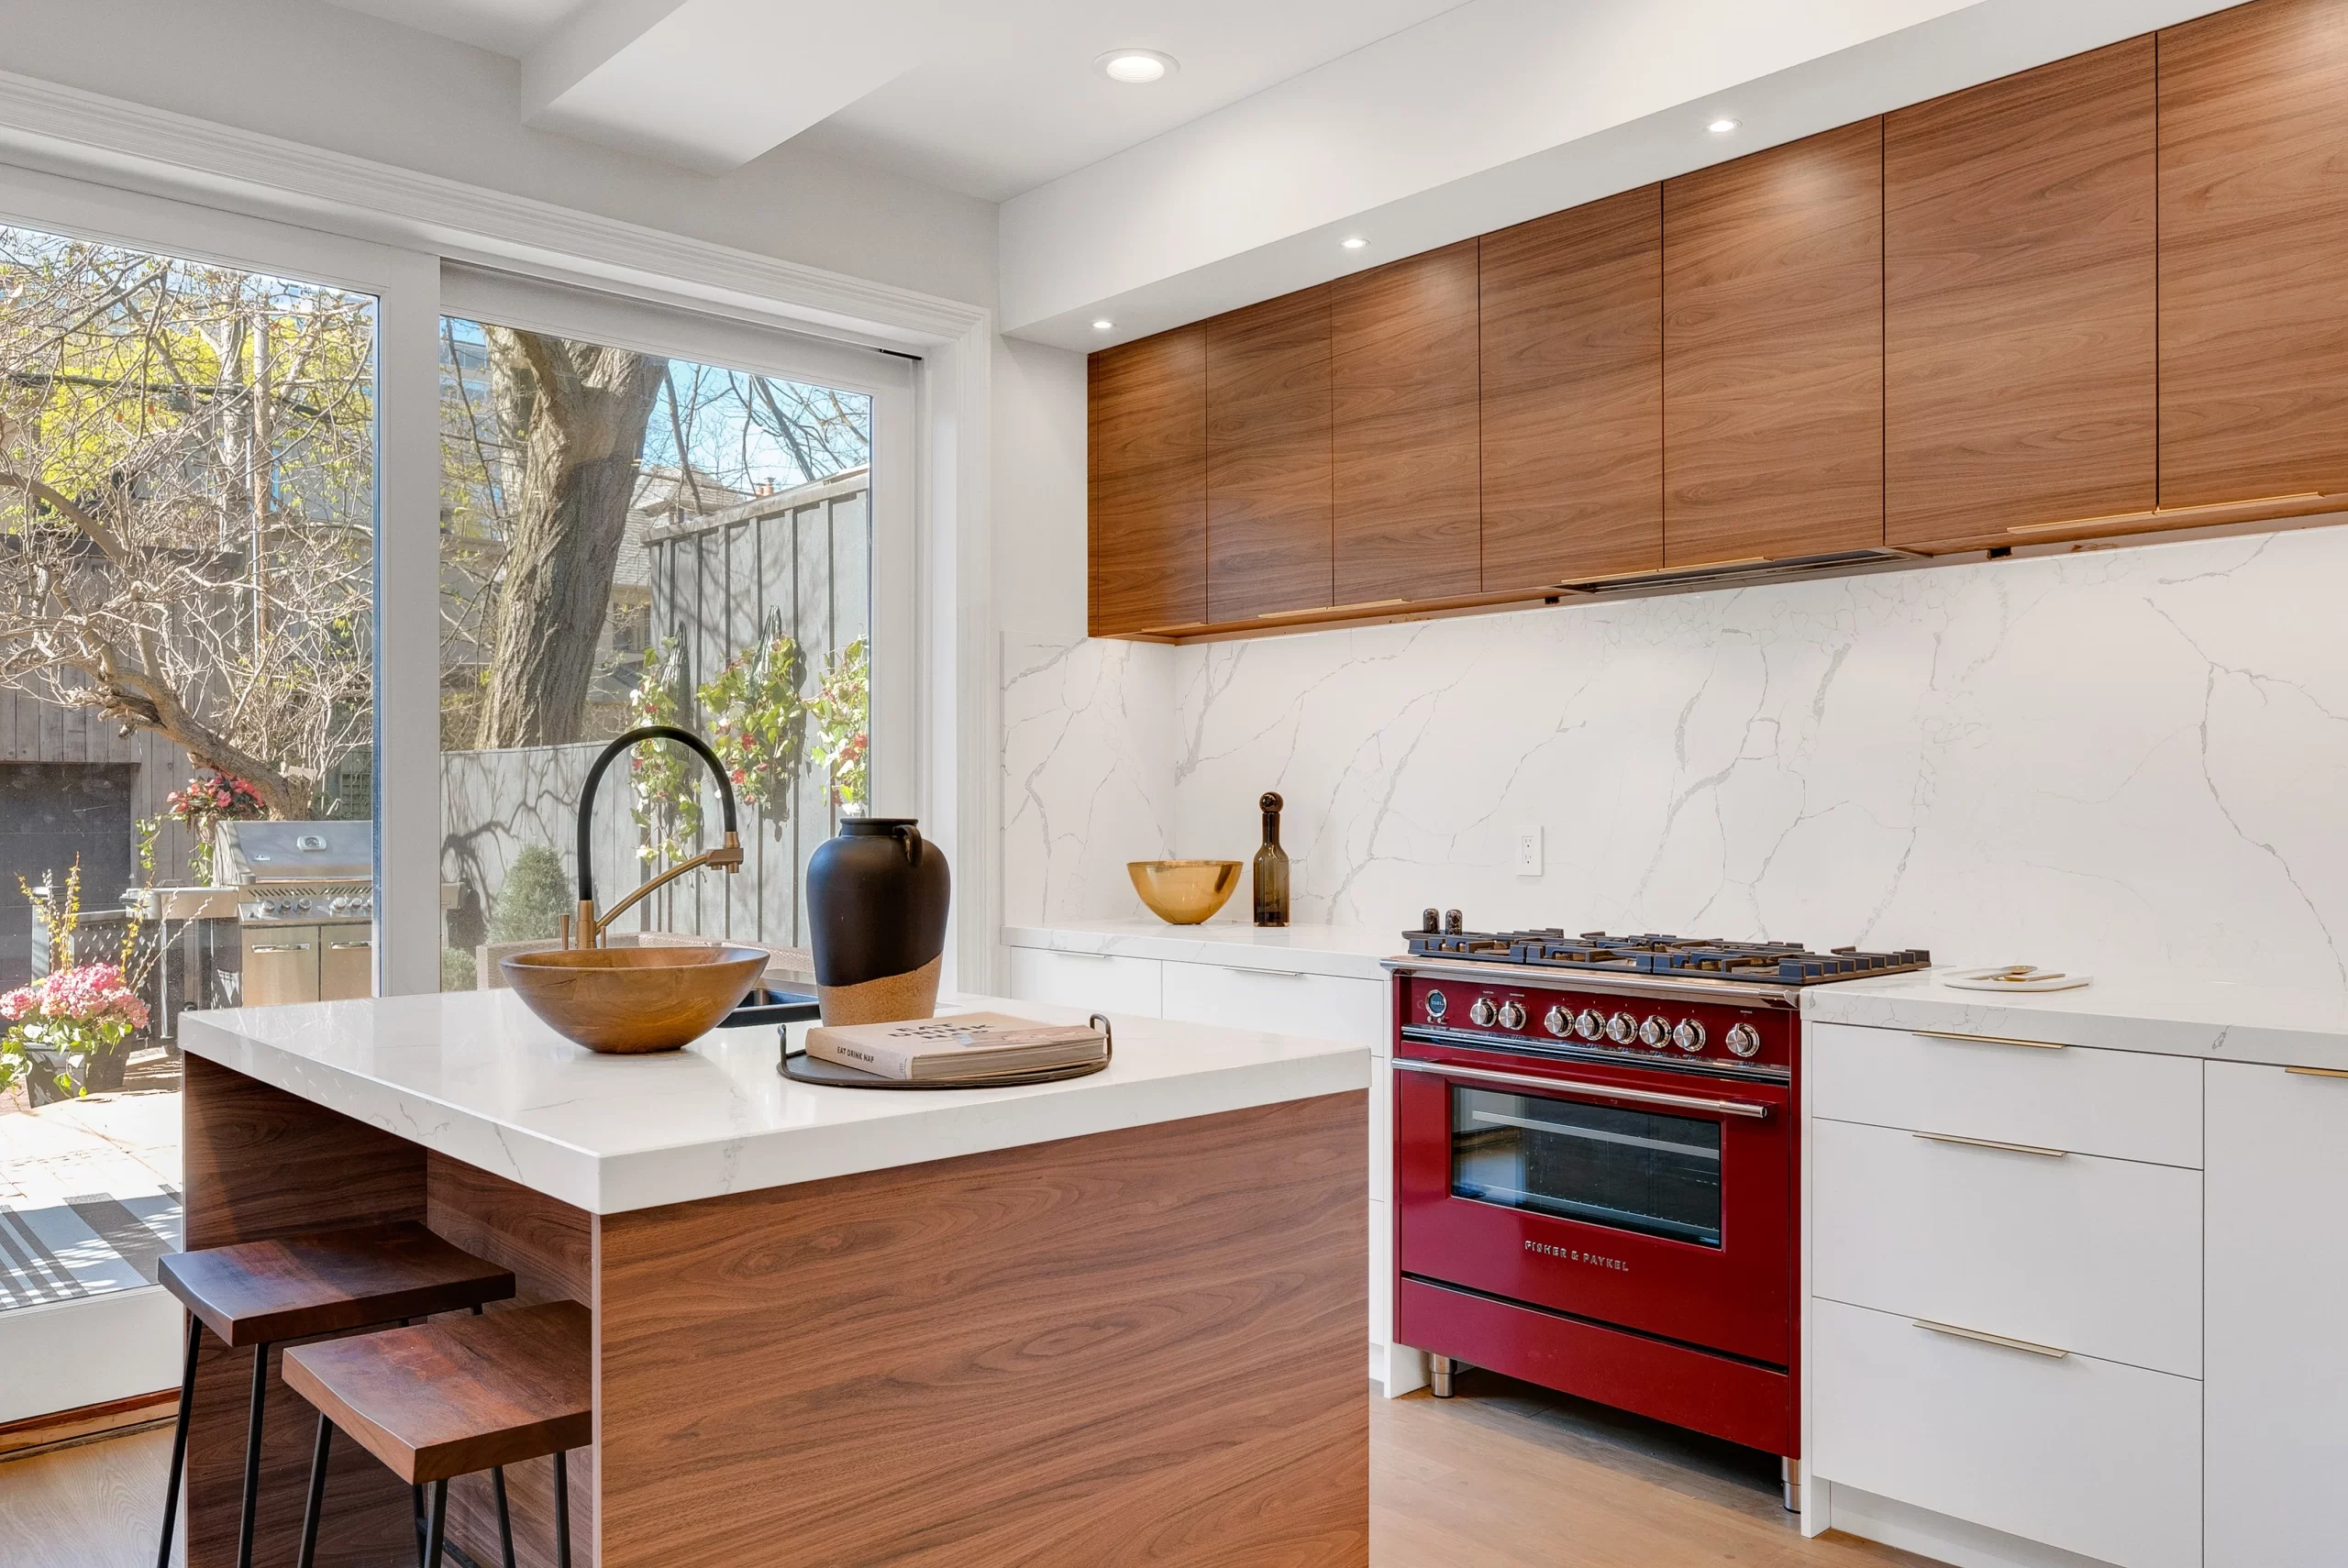 Home Makeover: How to Budget for Your Modern Kitchen Renovation.